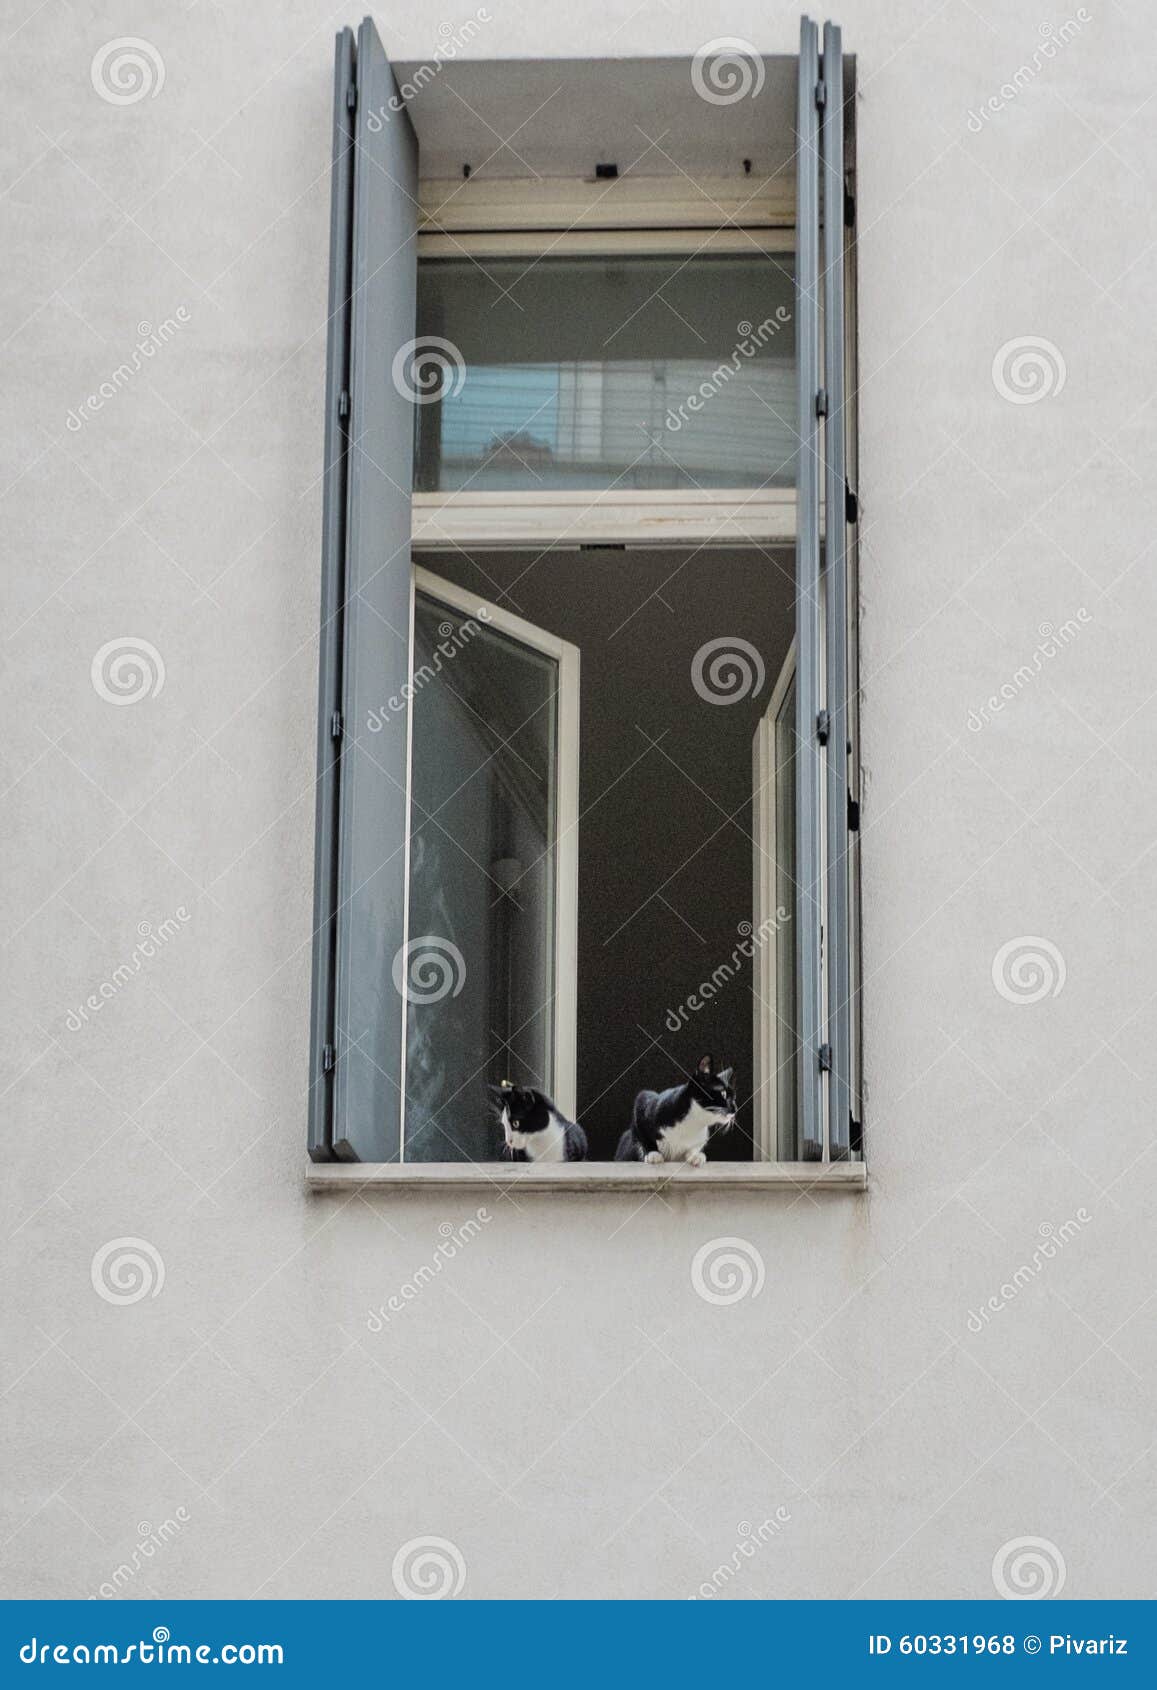 Two cats sit on a window stock photo. Image of garden - 60331968